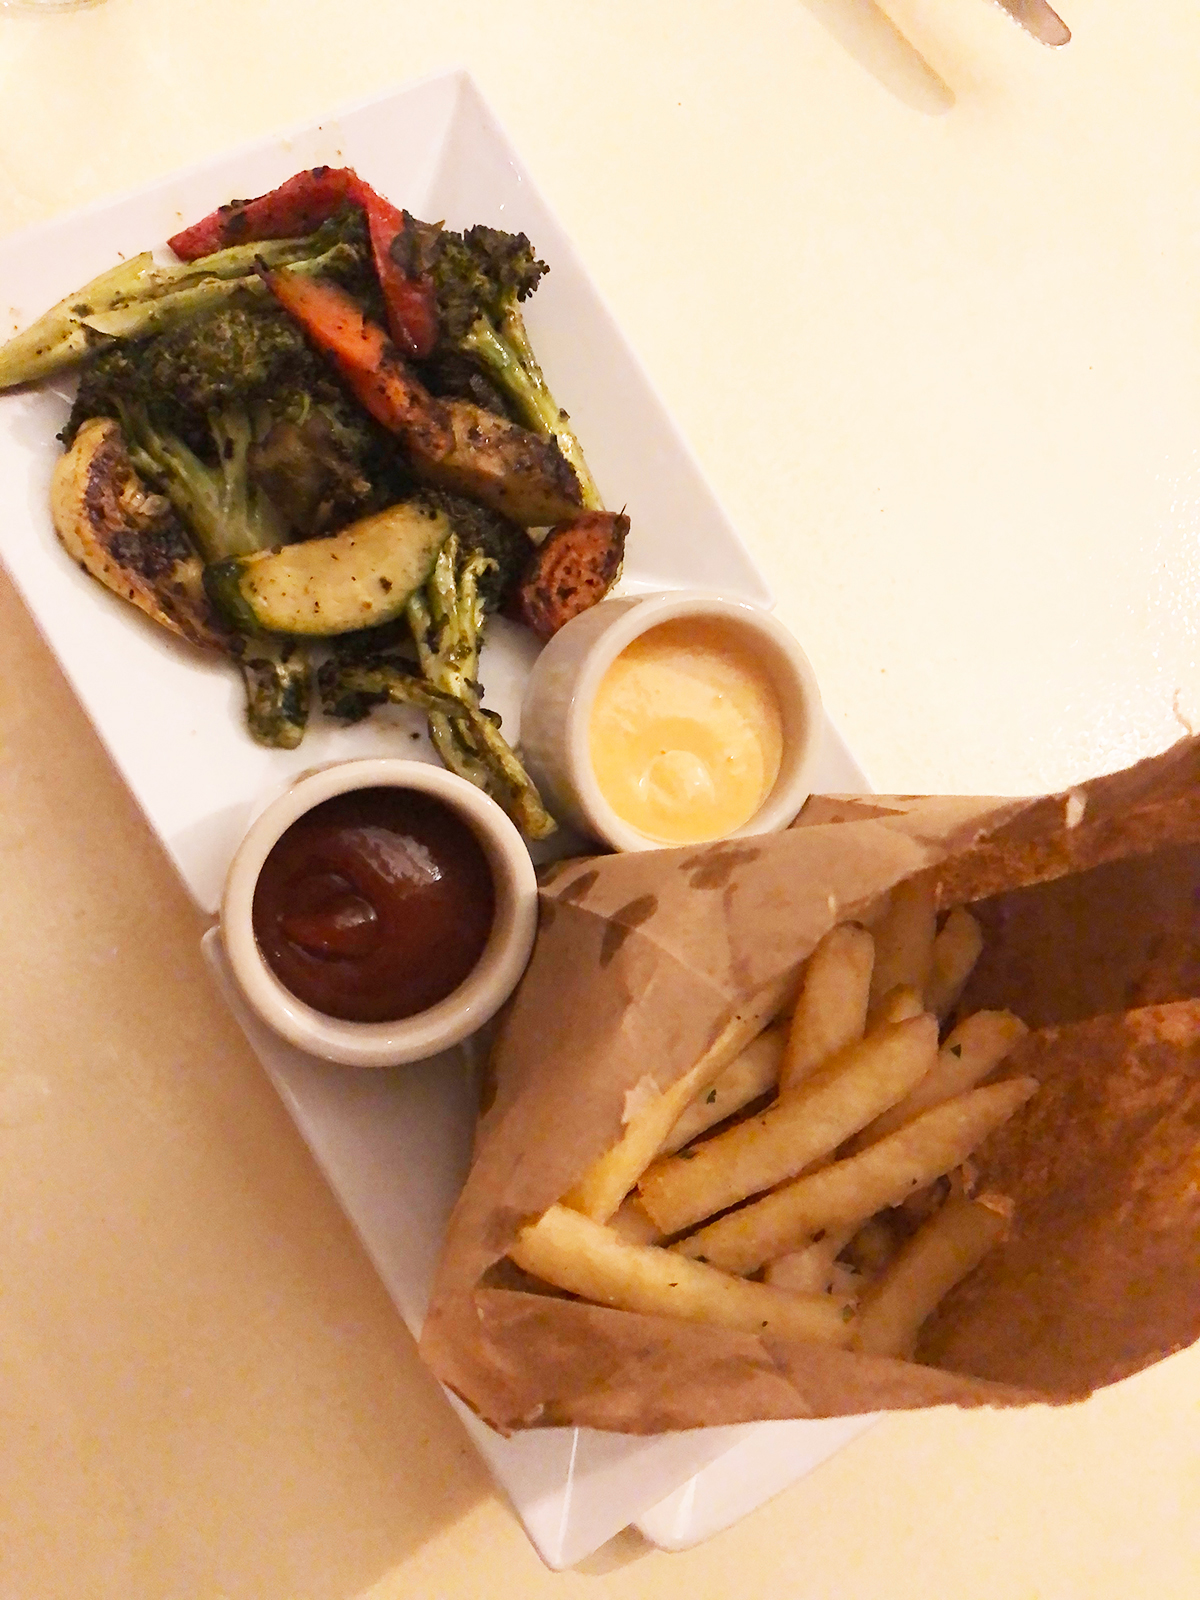 roasted veggies two sauces and truffle fries in a bag